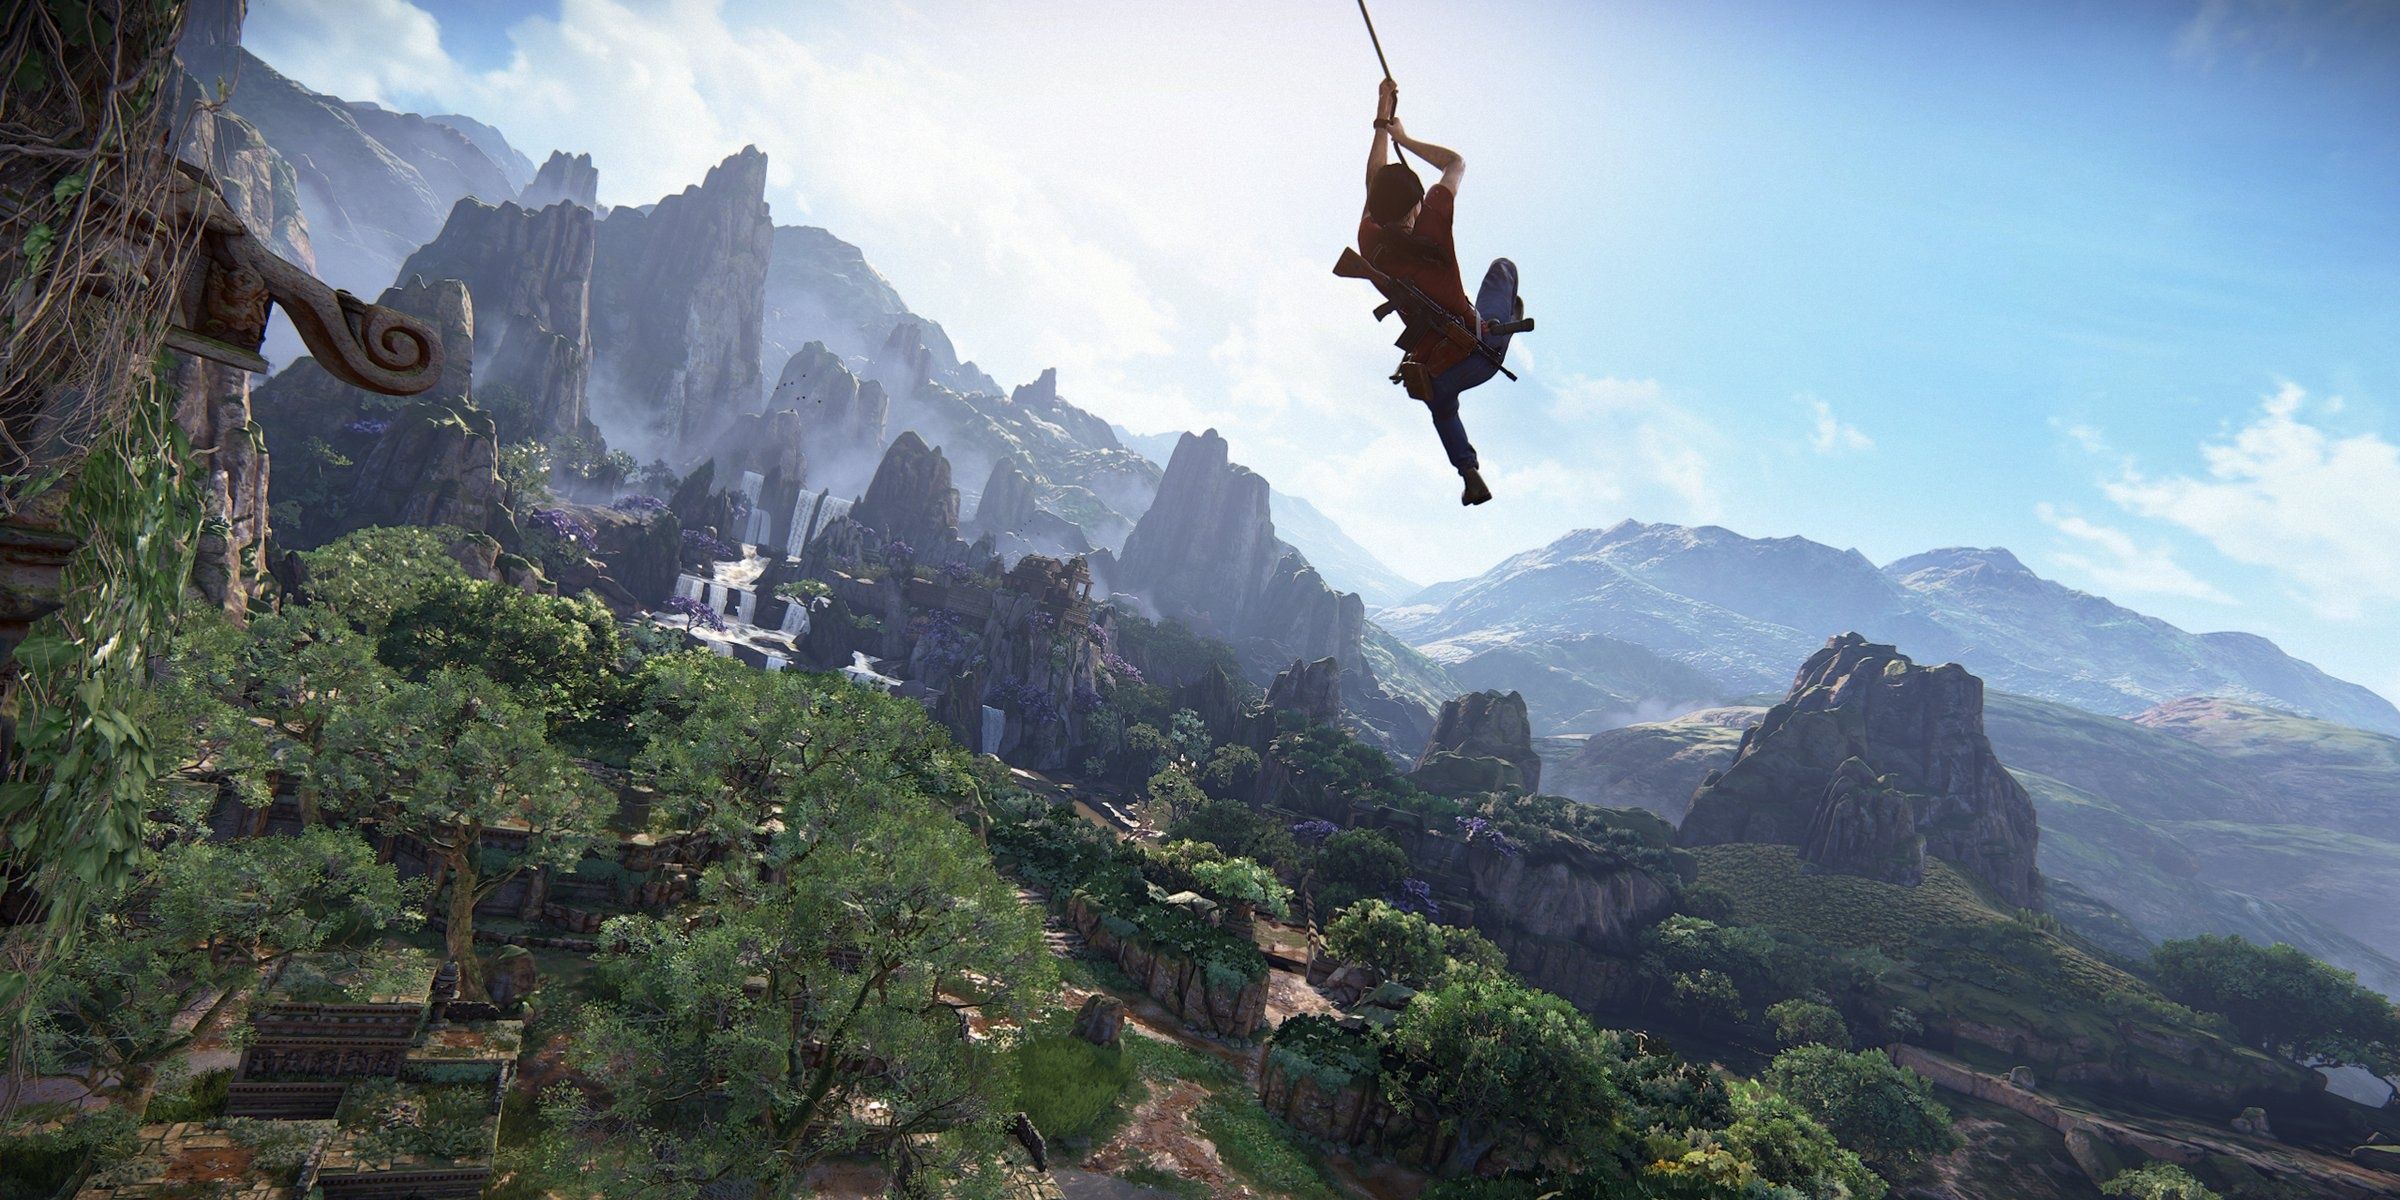 A screenshot showing Chloe swinging from a vine in Uncharted: The Lost Legacy